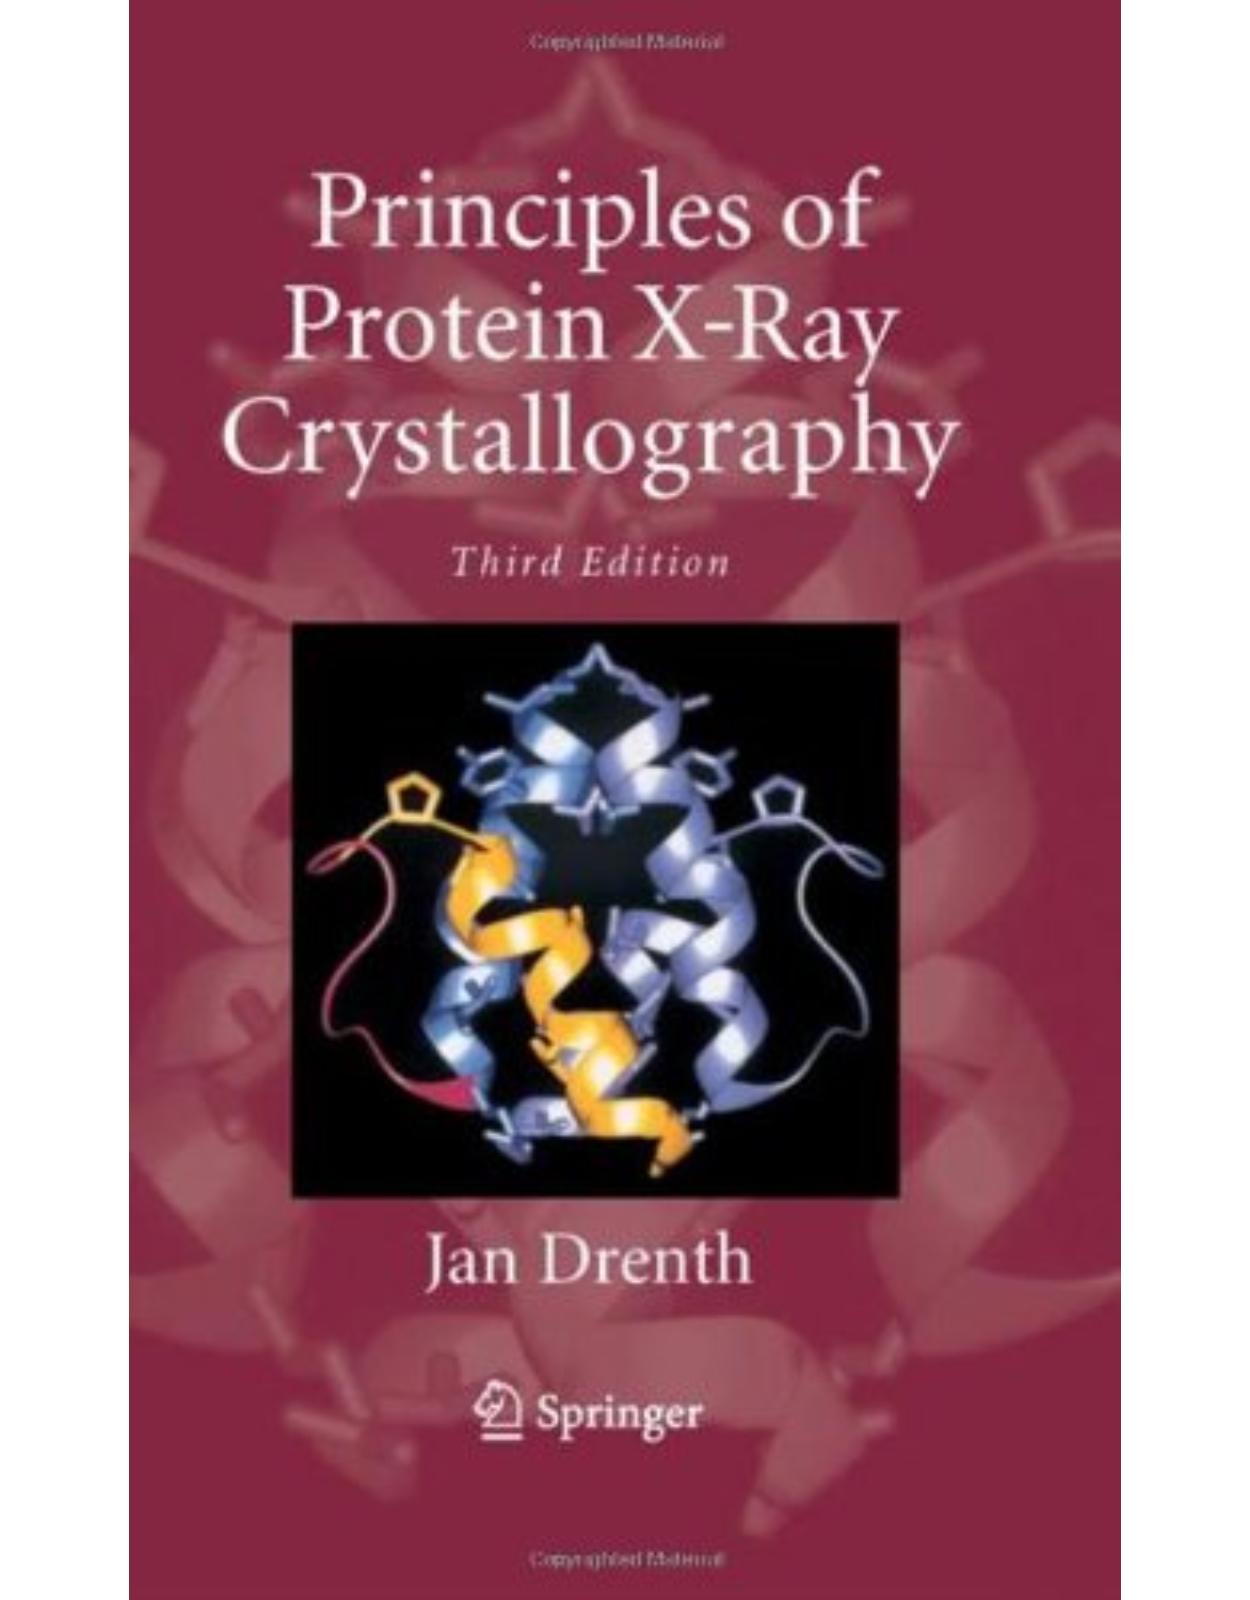 Principles of Protein X-Ray Crystallography (Springer Advanced Texts in Chemistry) 